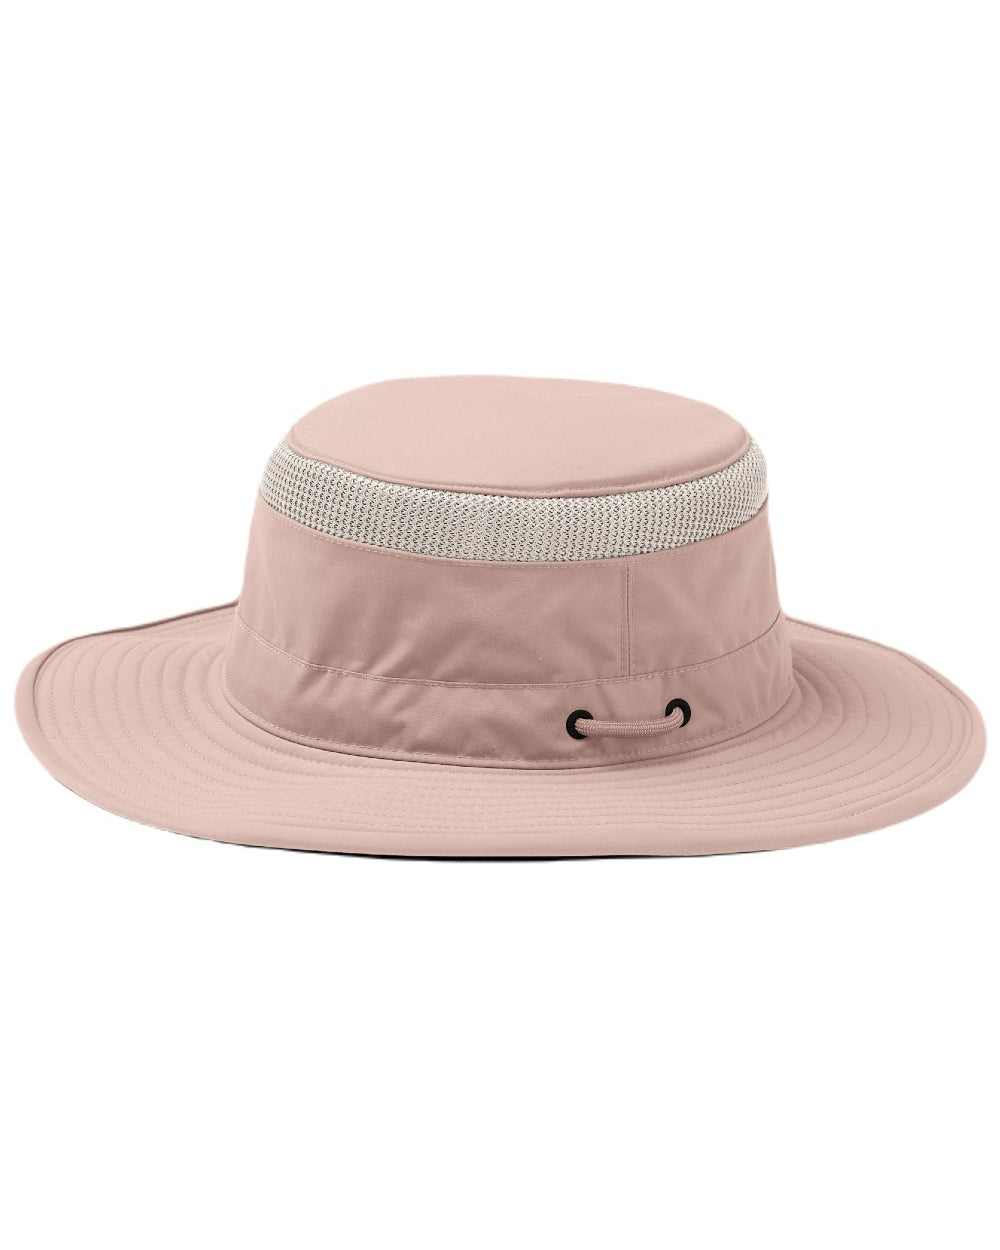 Soft mauve coloured Tilley Hats Airflo Boonie on white background 